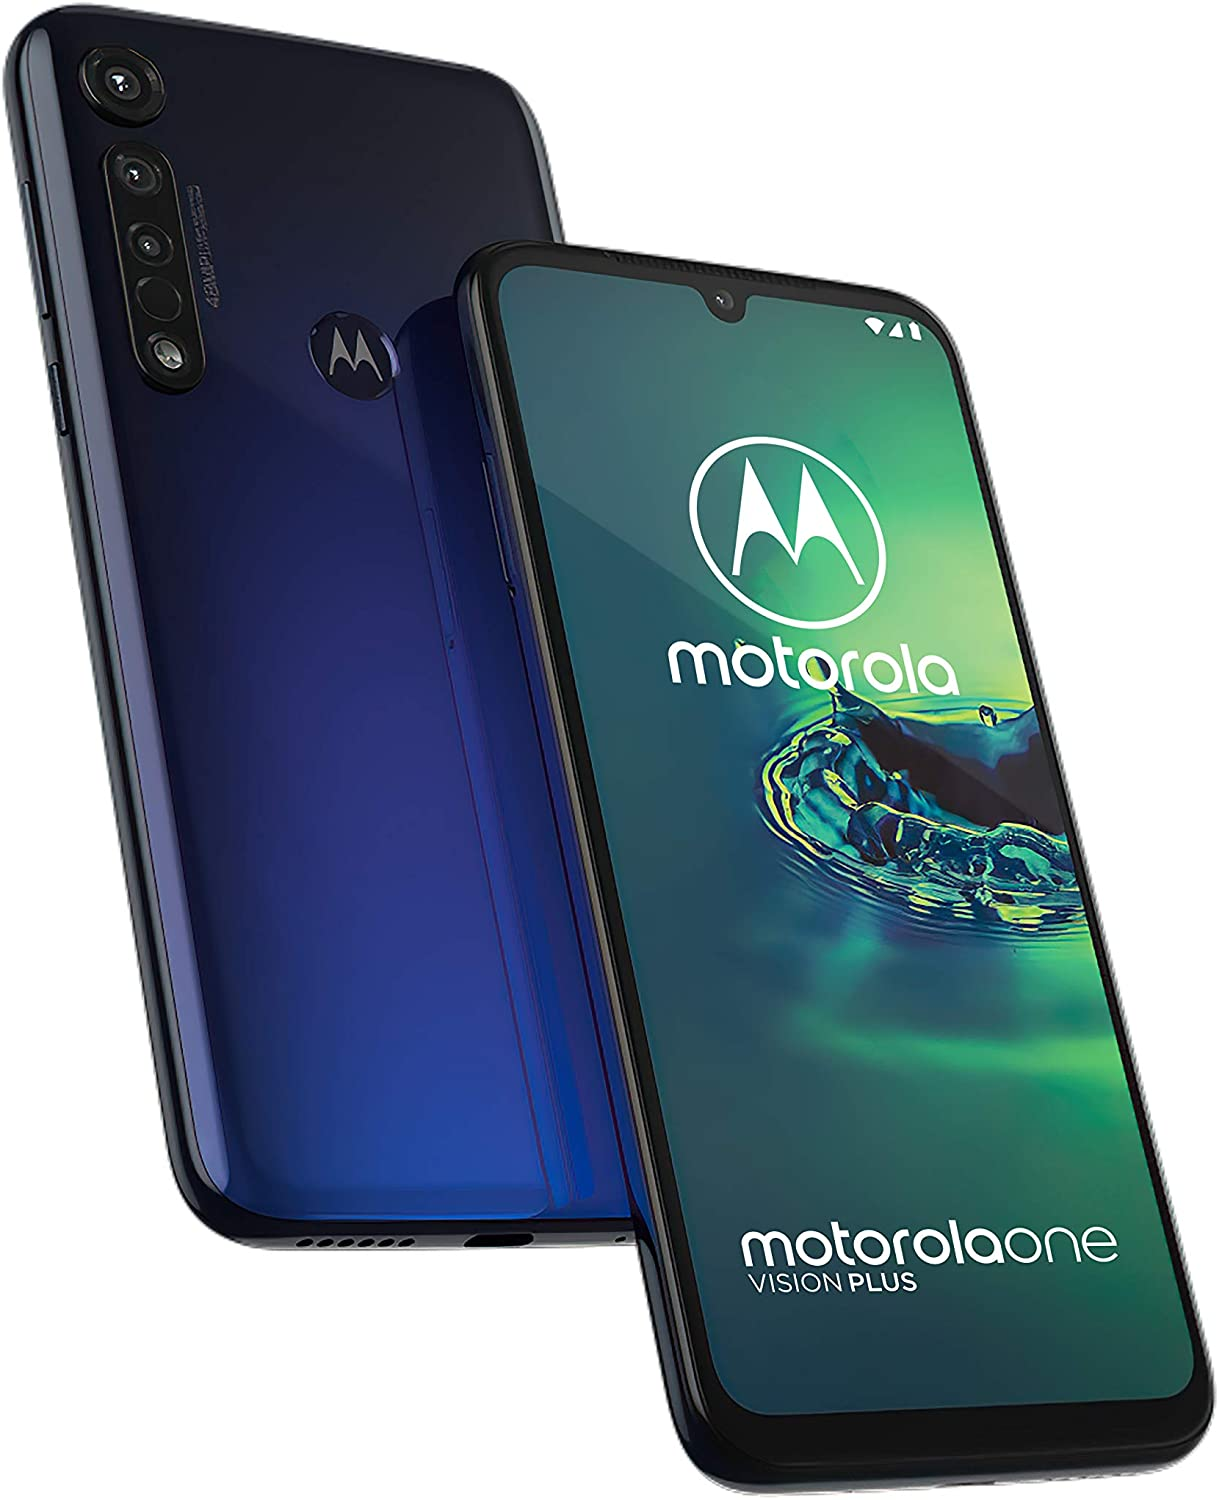 Motorola One Vision Plus launch as a Re-branded Moto G8 Plus -Specs, Feature, Price, Color and more